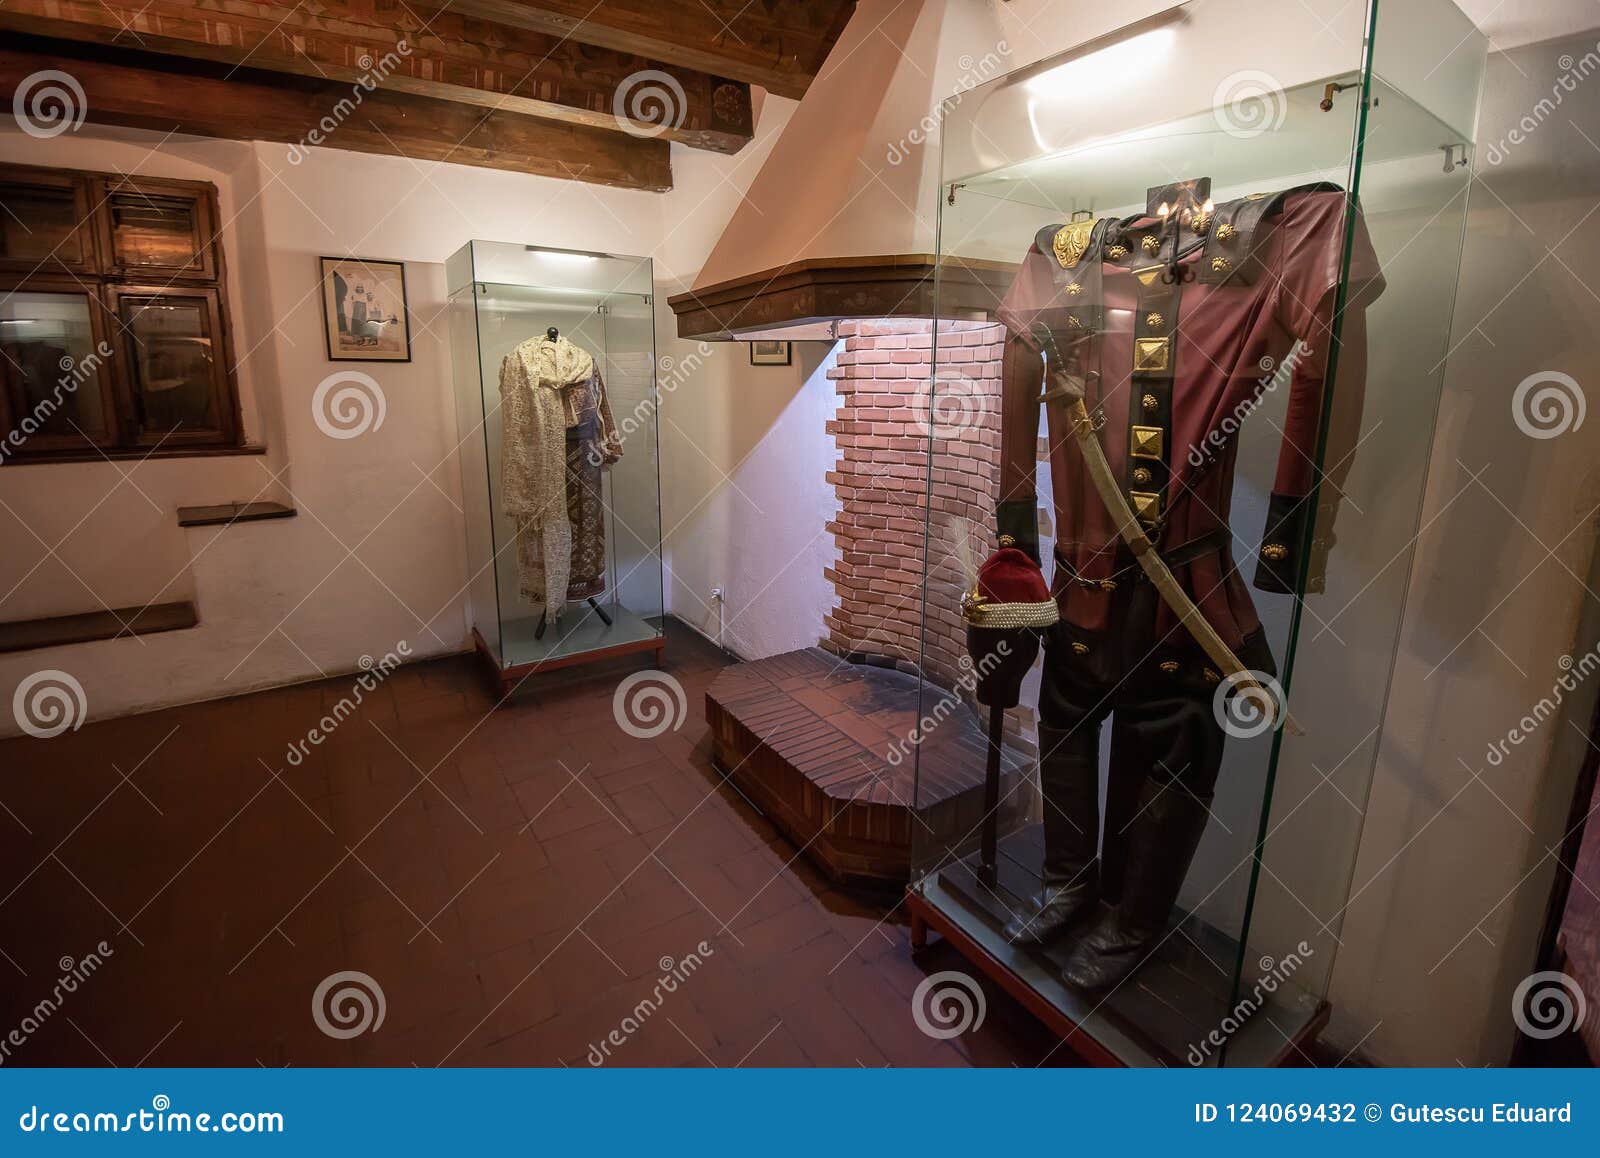 Inside View Of Bran Castle From Romania Also Known As